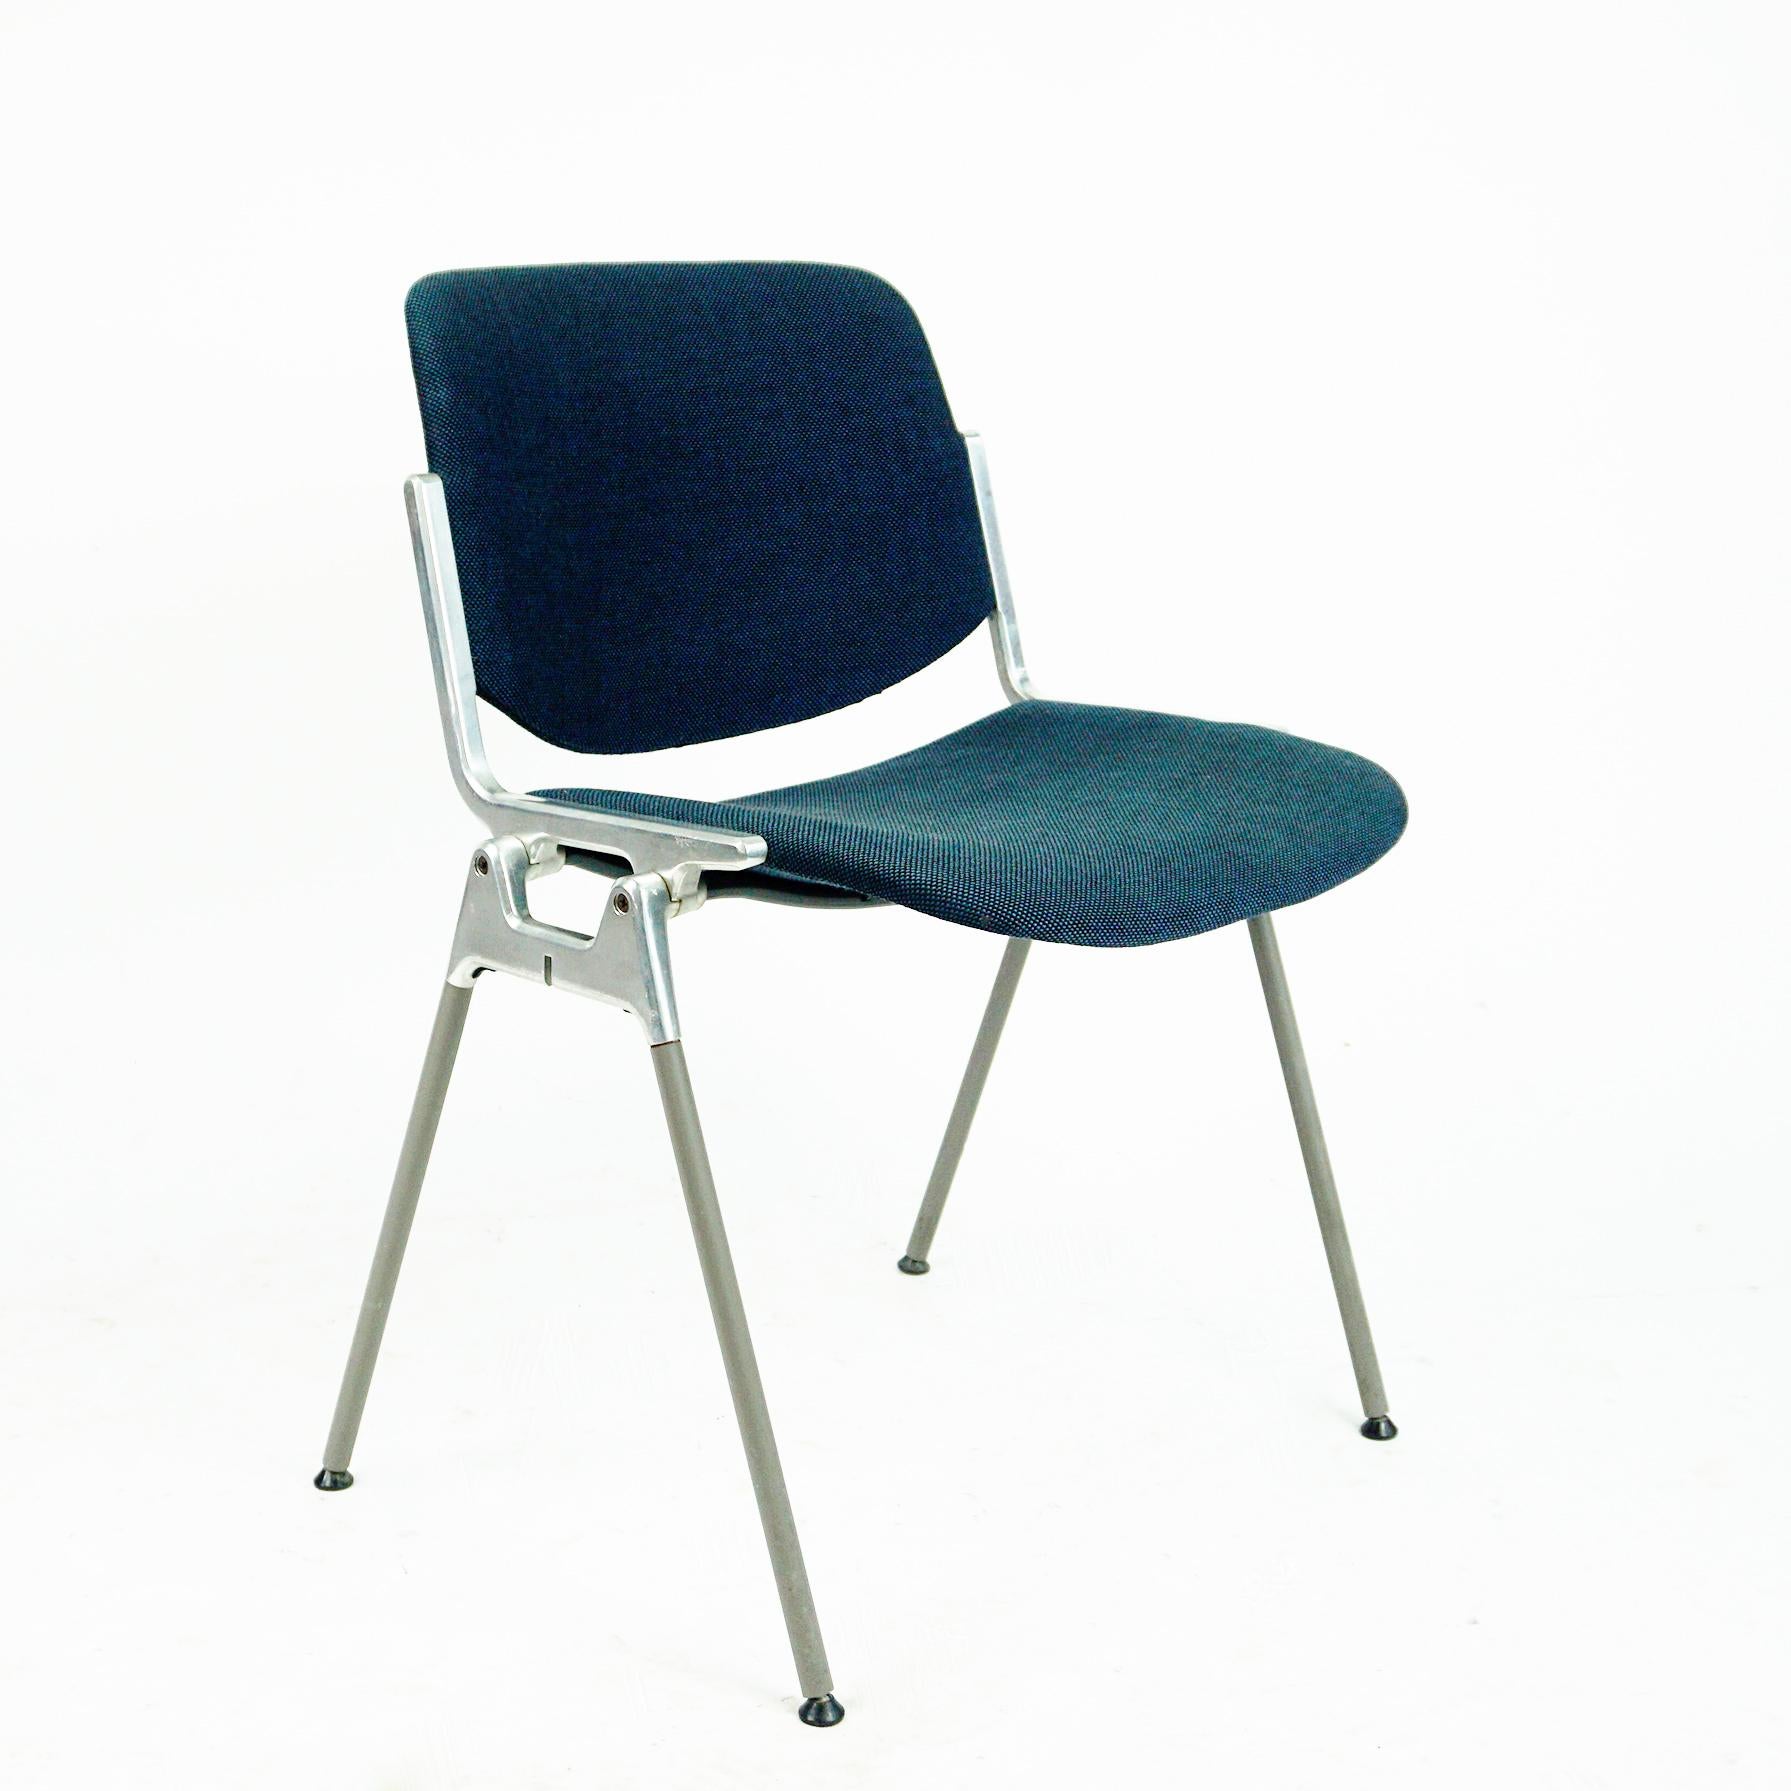 Late 20th Century Set of Four Blue Castelli Dsc 106 Stacking Chairs by Giancarlo Piretti, Italy For Sale